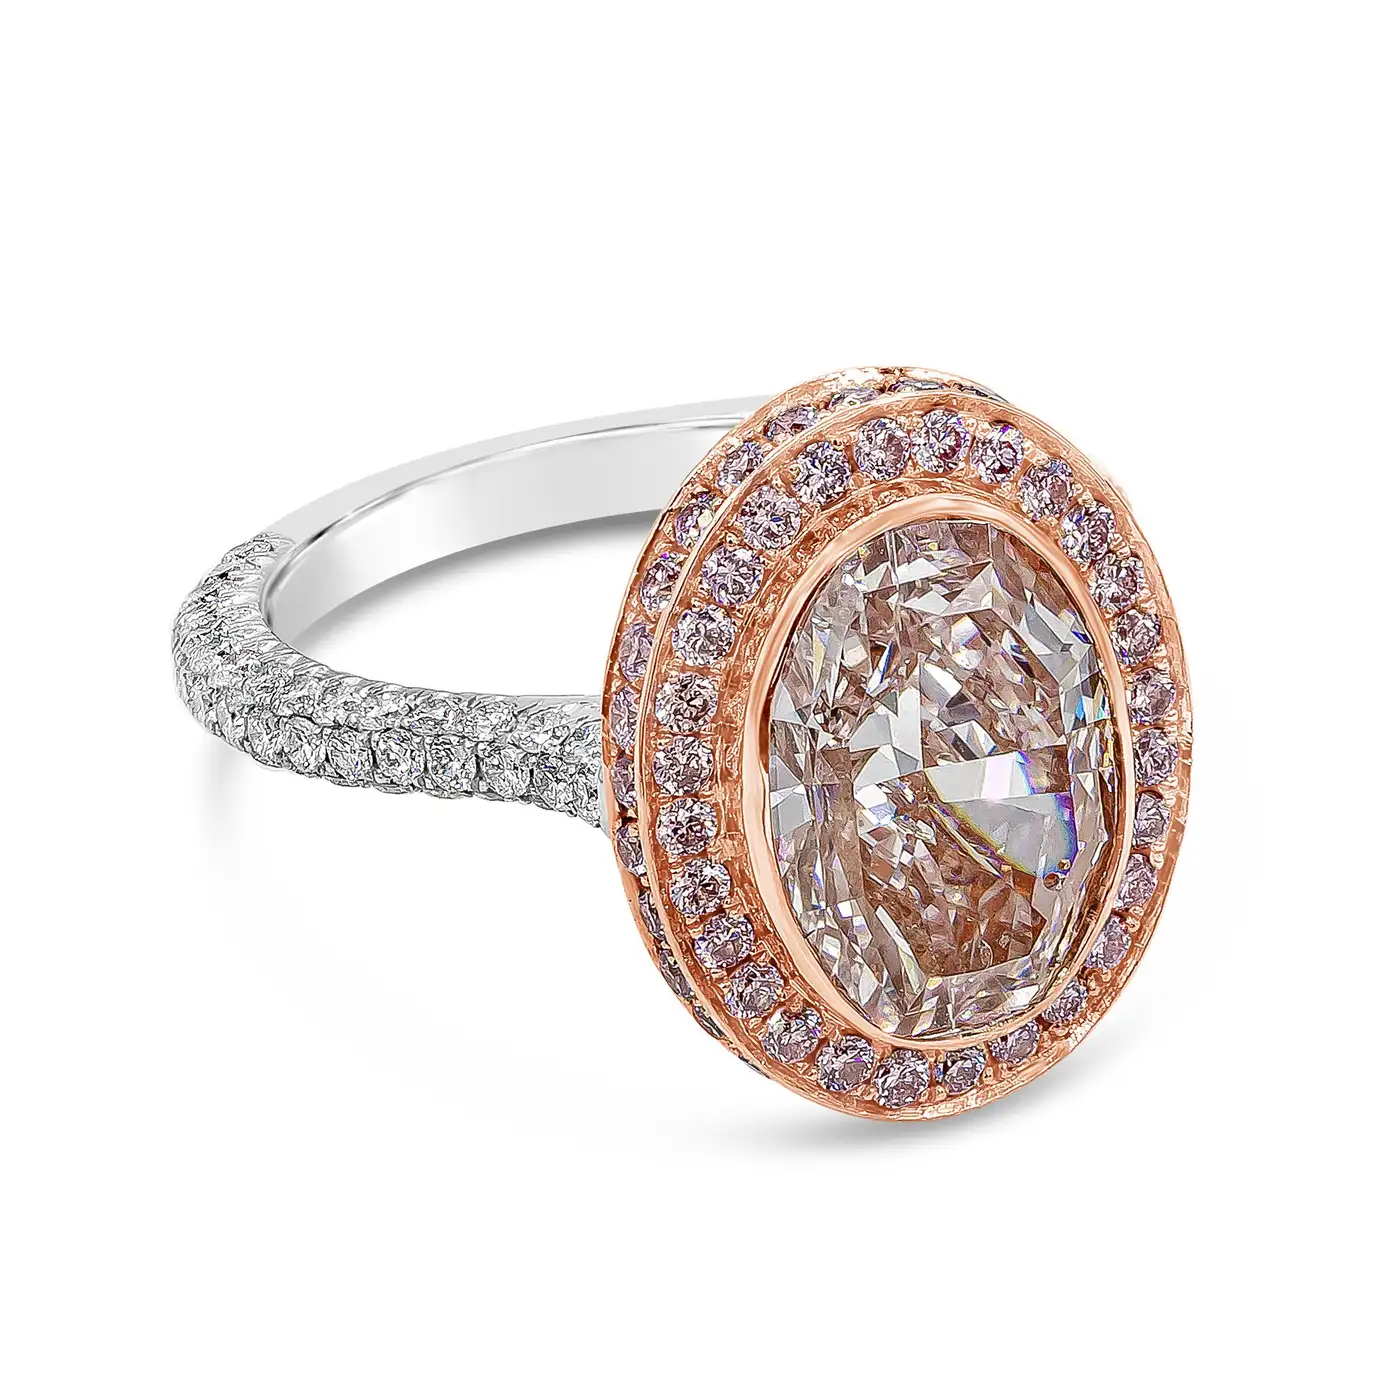 3.66-Oval-Cut-Fancy-Light-Pink-Diamond-Halo-Engagement-Ring-GIA-Certified-5.webp